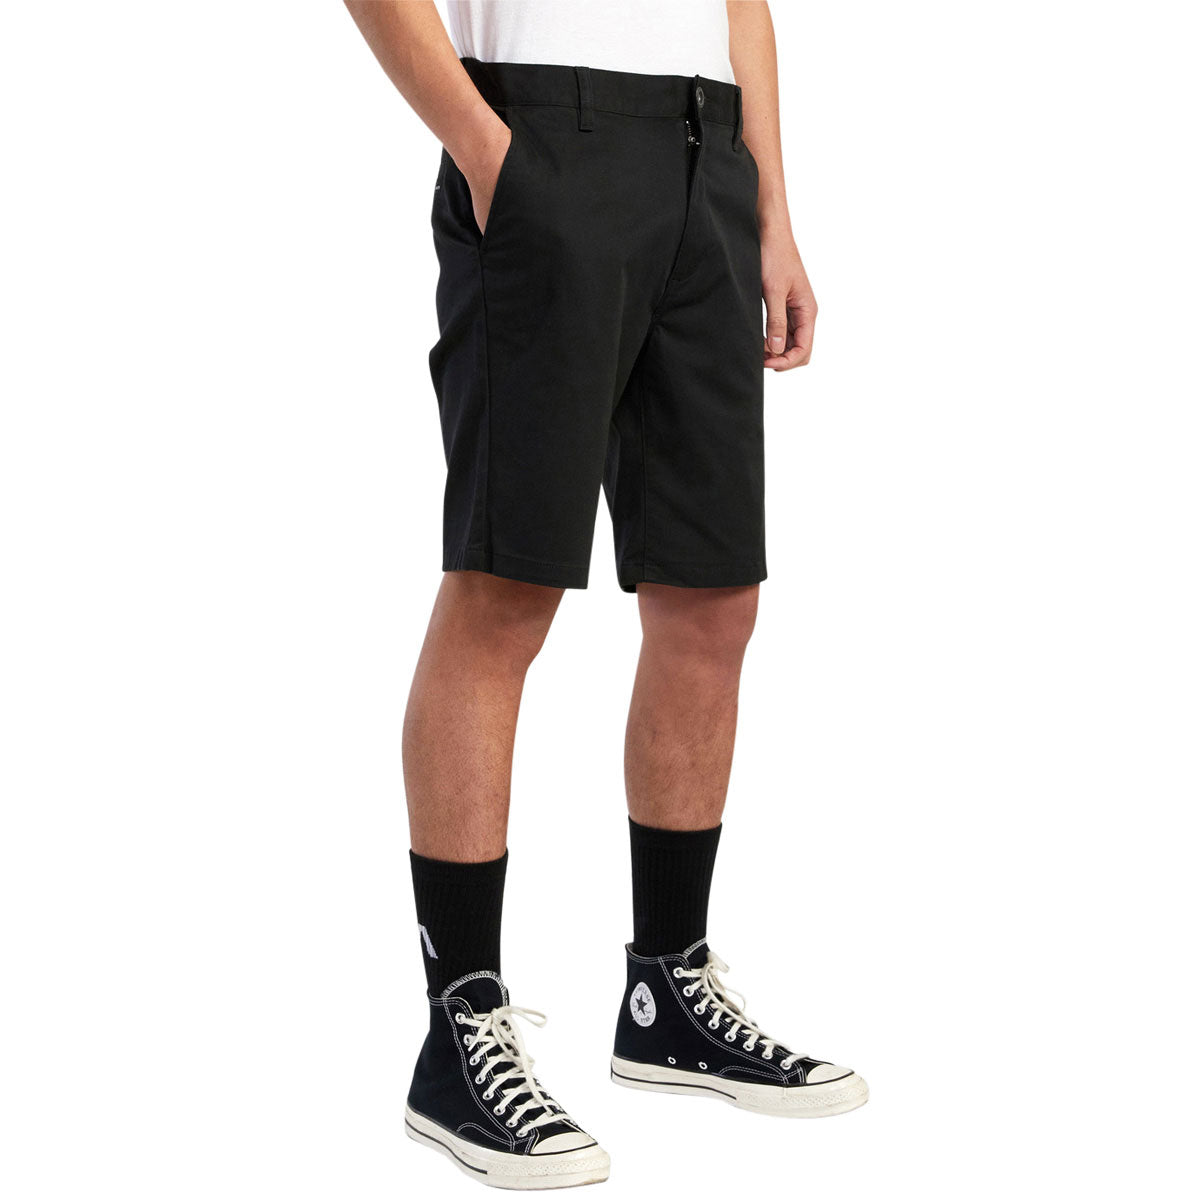 RVCA The Weekend Stretch Shorts - Black image 5